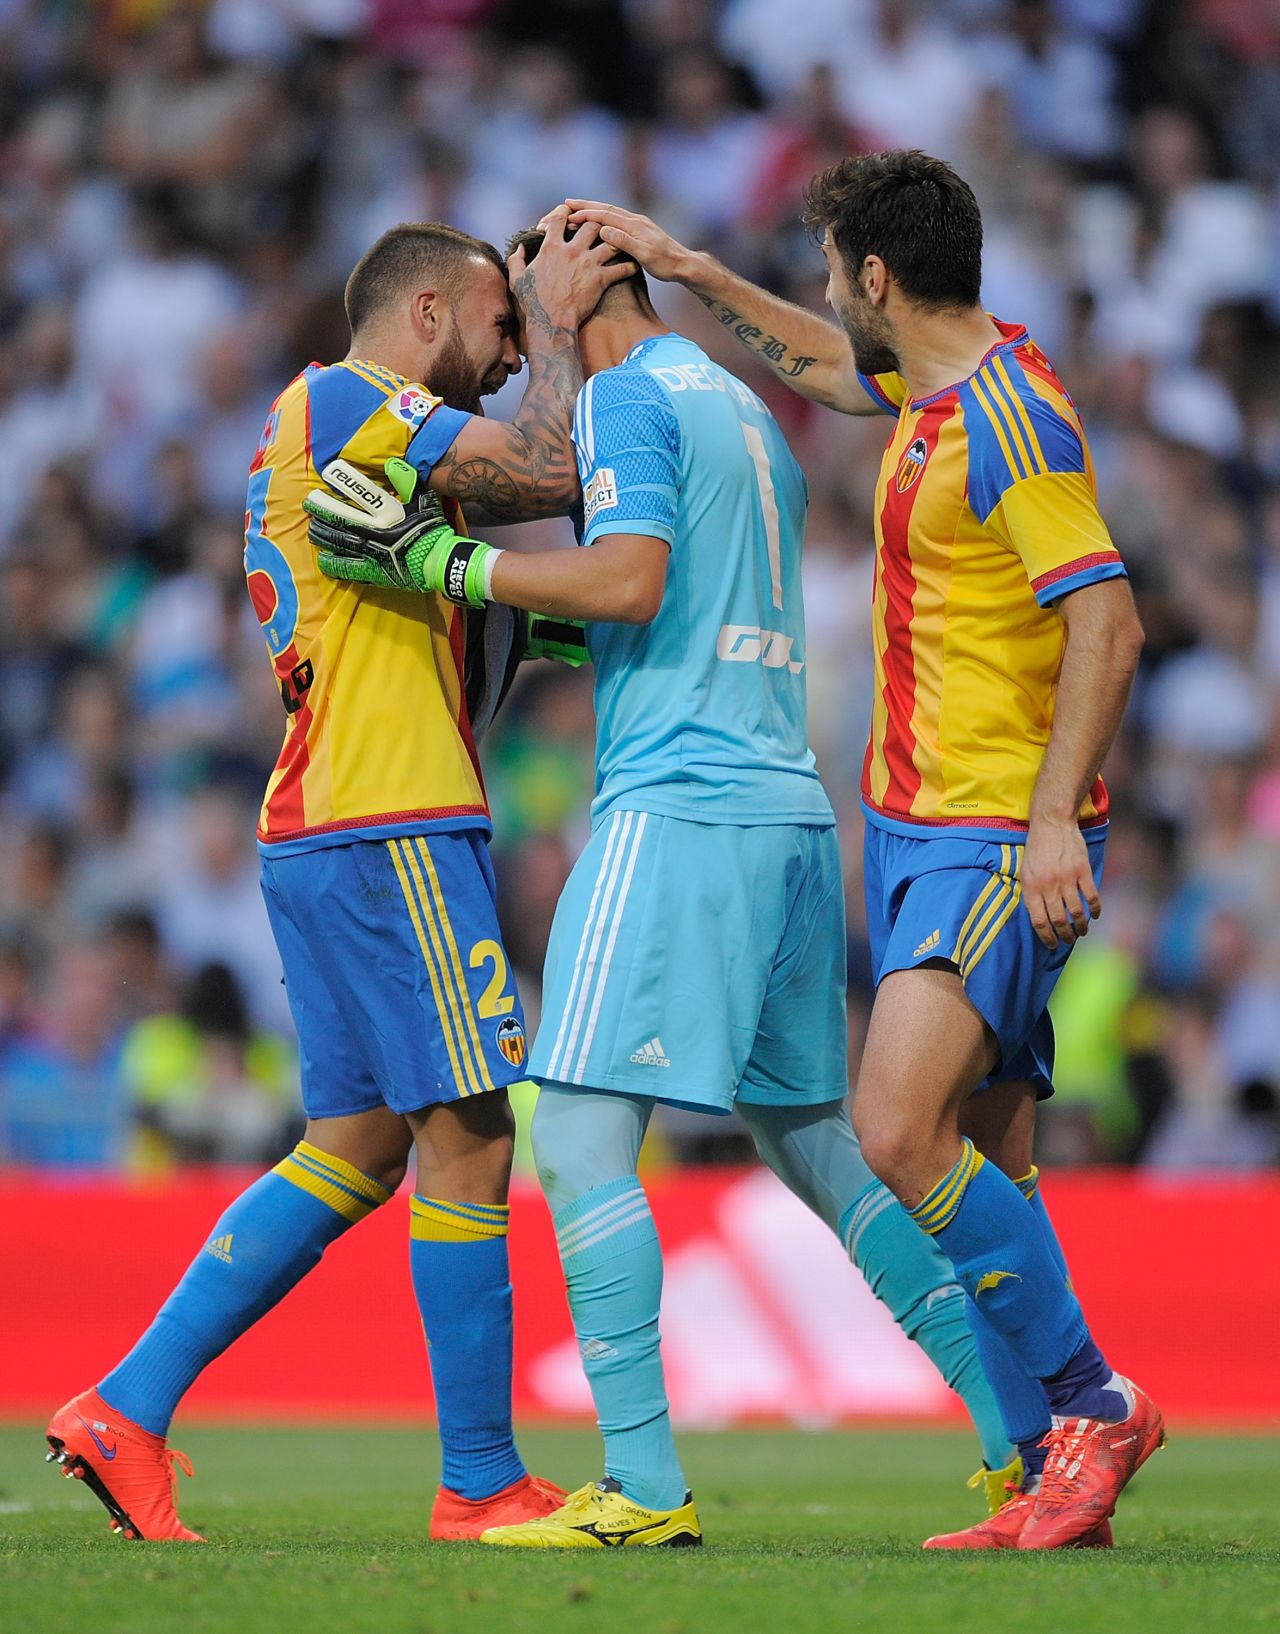 The Valencia goalkeeper is congratulated by his teammates as his save earned the visitors a valuable point as they continue to chase a Champions League place for next season.